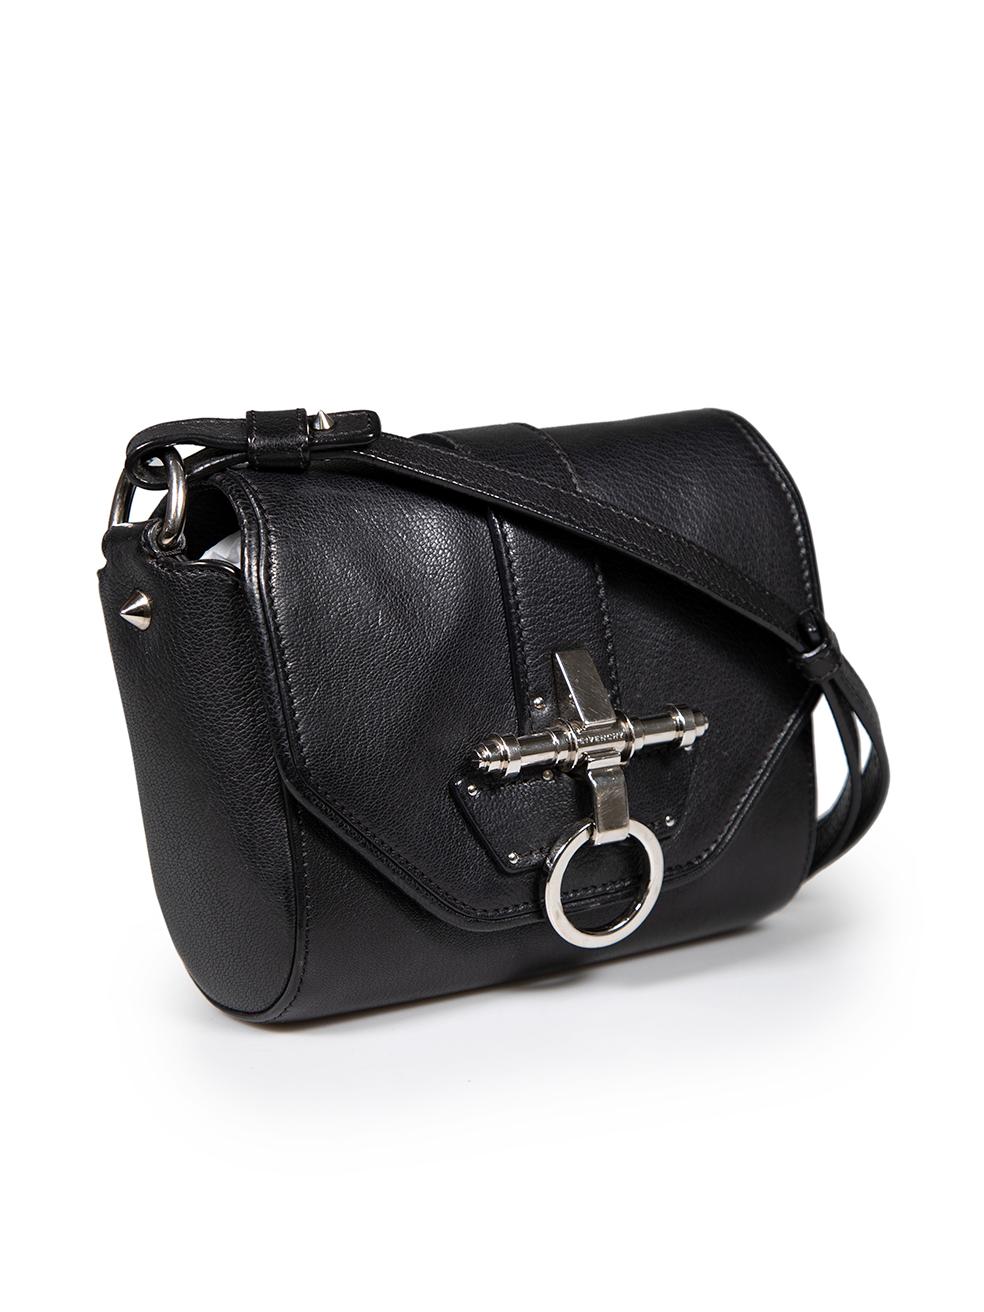 CONDITION is Very good. Minimal wear to bag is evident. Minimal wear to front metal hardware with some small scratches on this used Givenchy designer resale item. This item comes with original dust bag.
 
 
 
 Details
 
 
 Model: Obsedia
 
 Black
 
